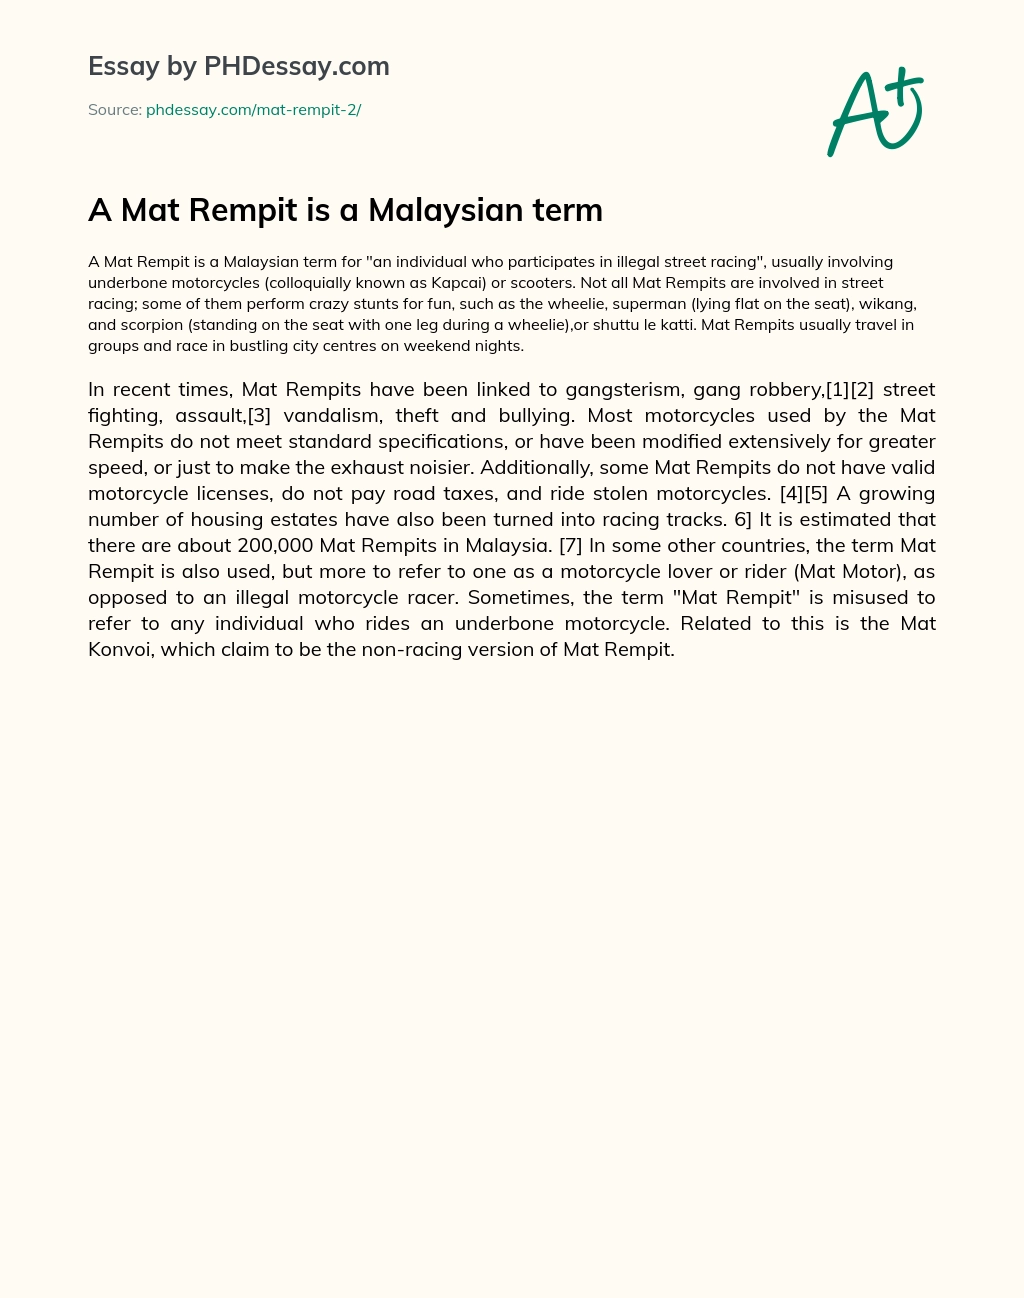 A Mat Rempit is a Malaysian term essay